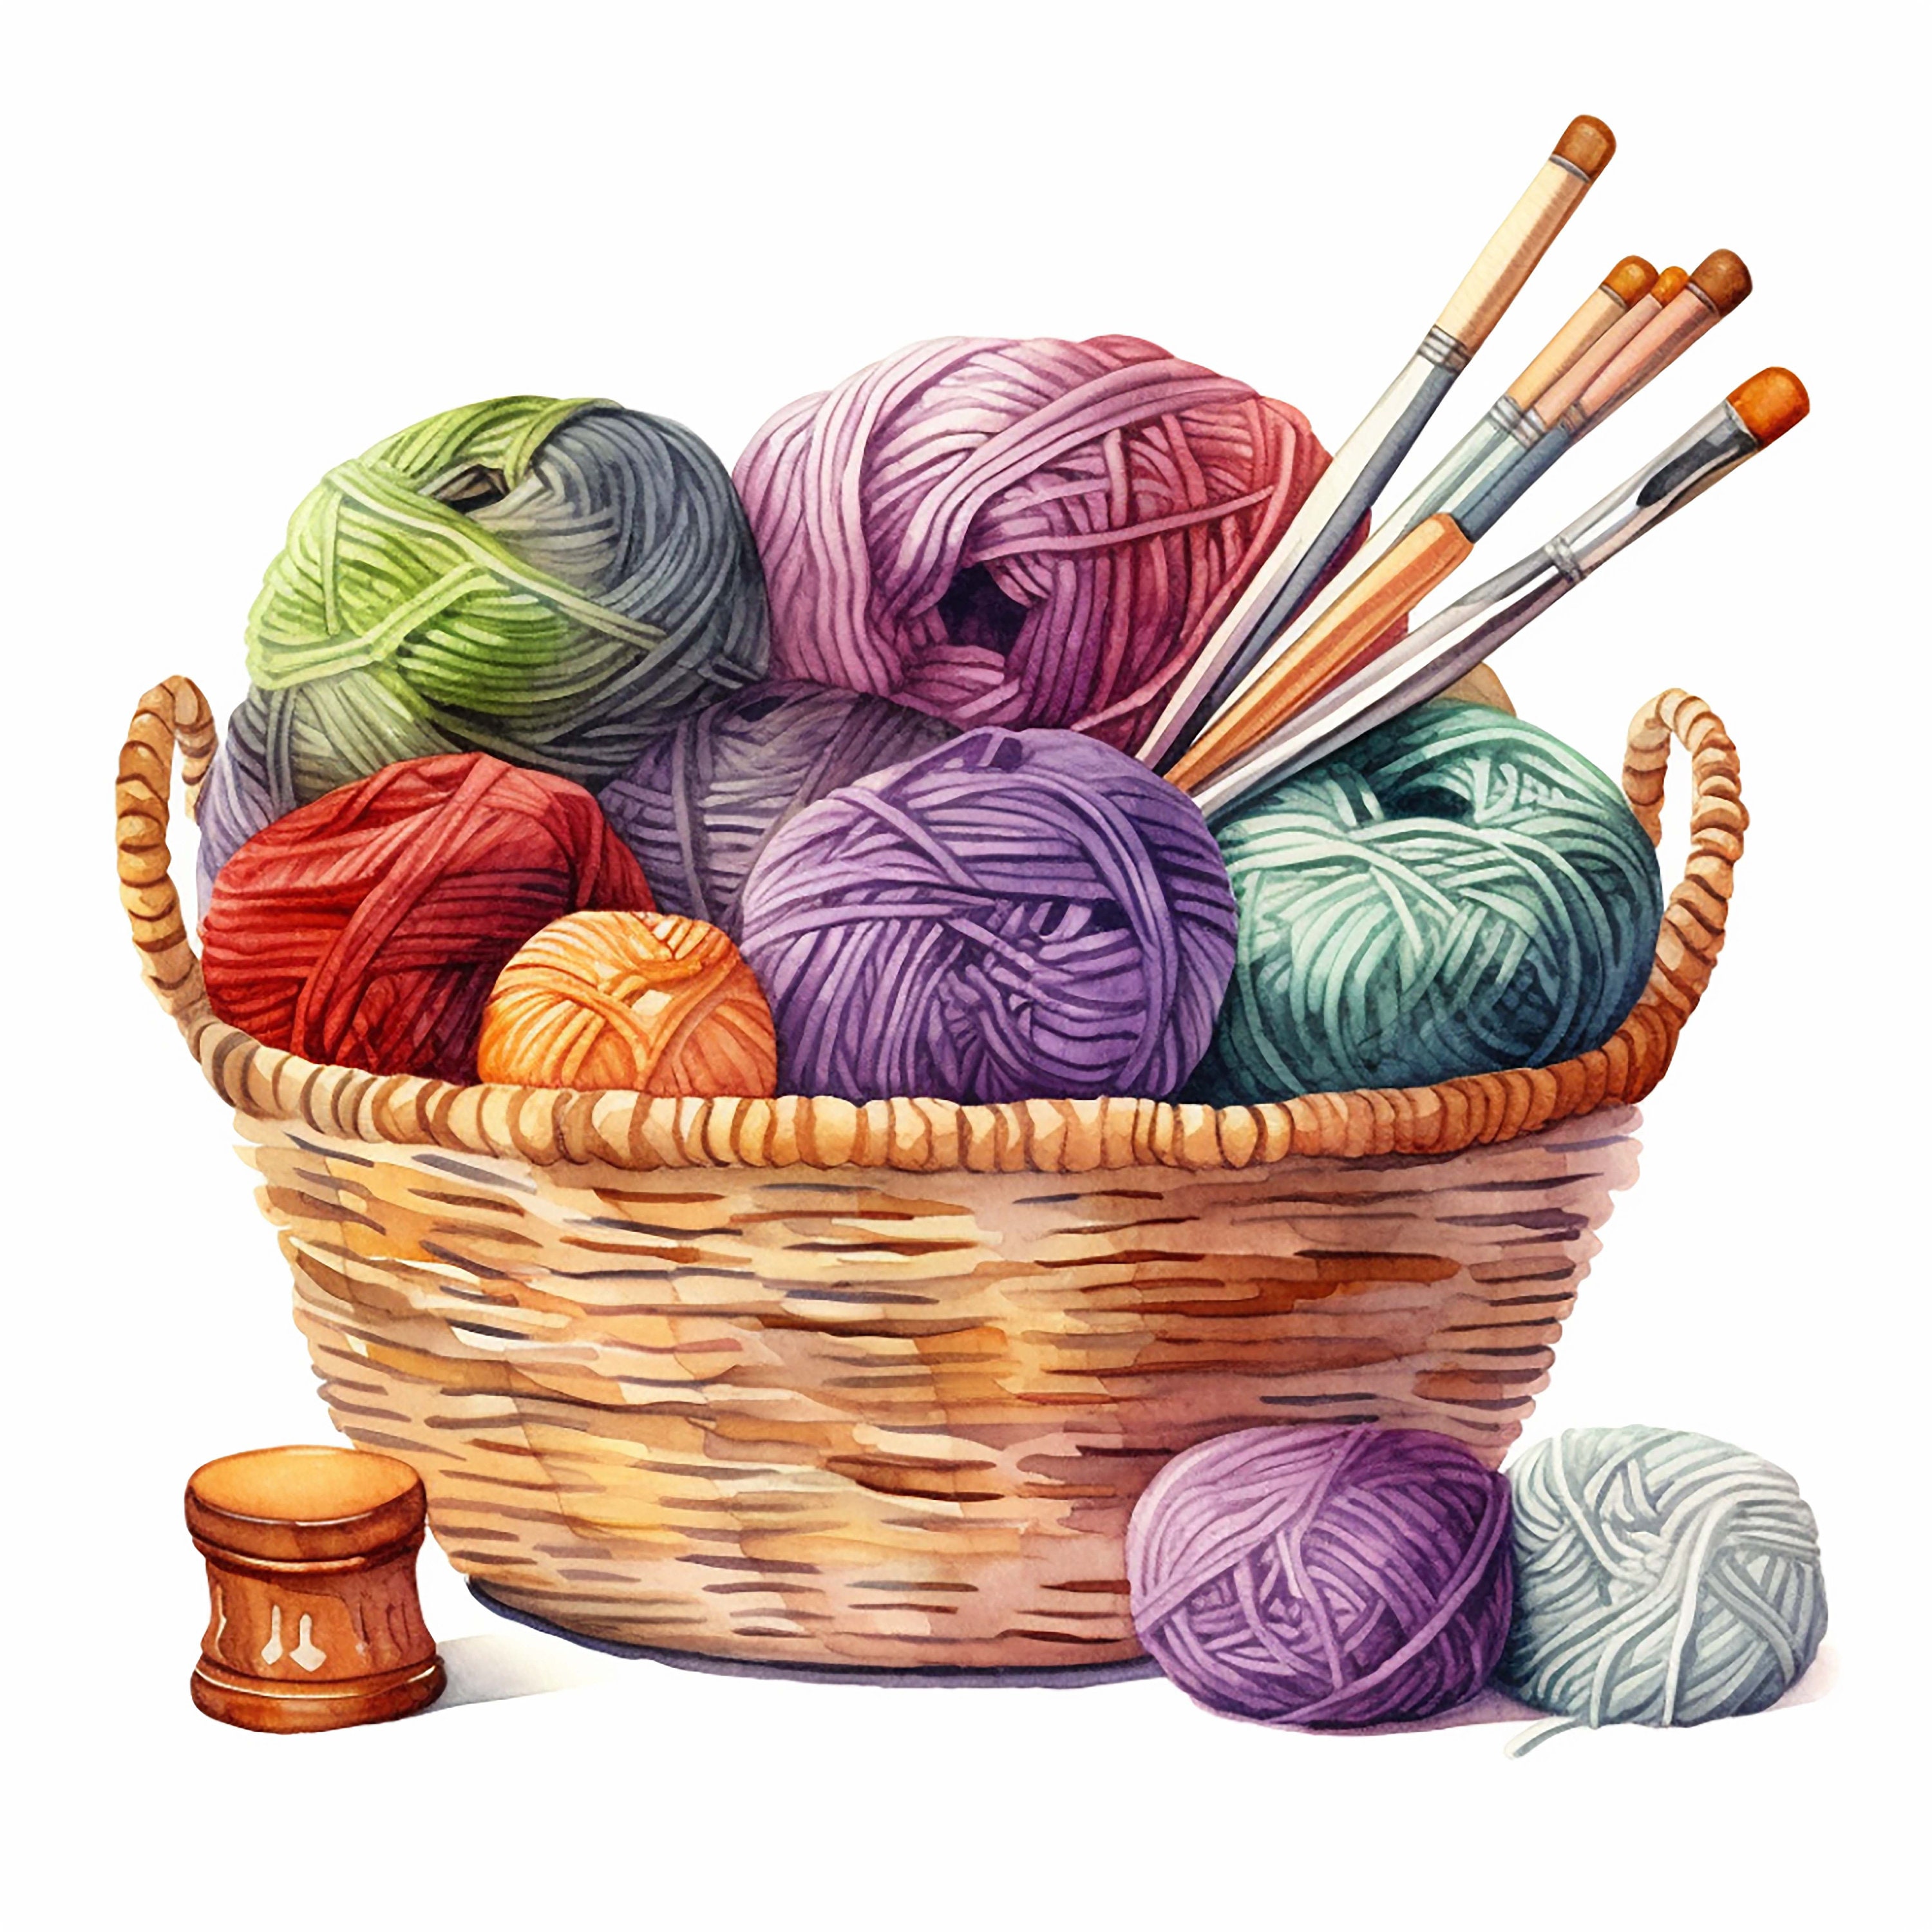 Watercolor Knitting Basket Clipart Graphic by craftsmaker · Creative Fabrica